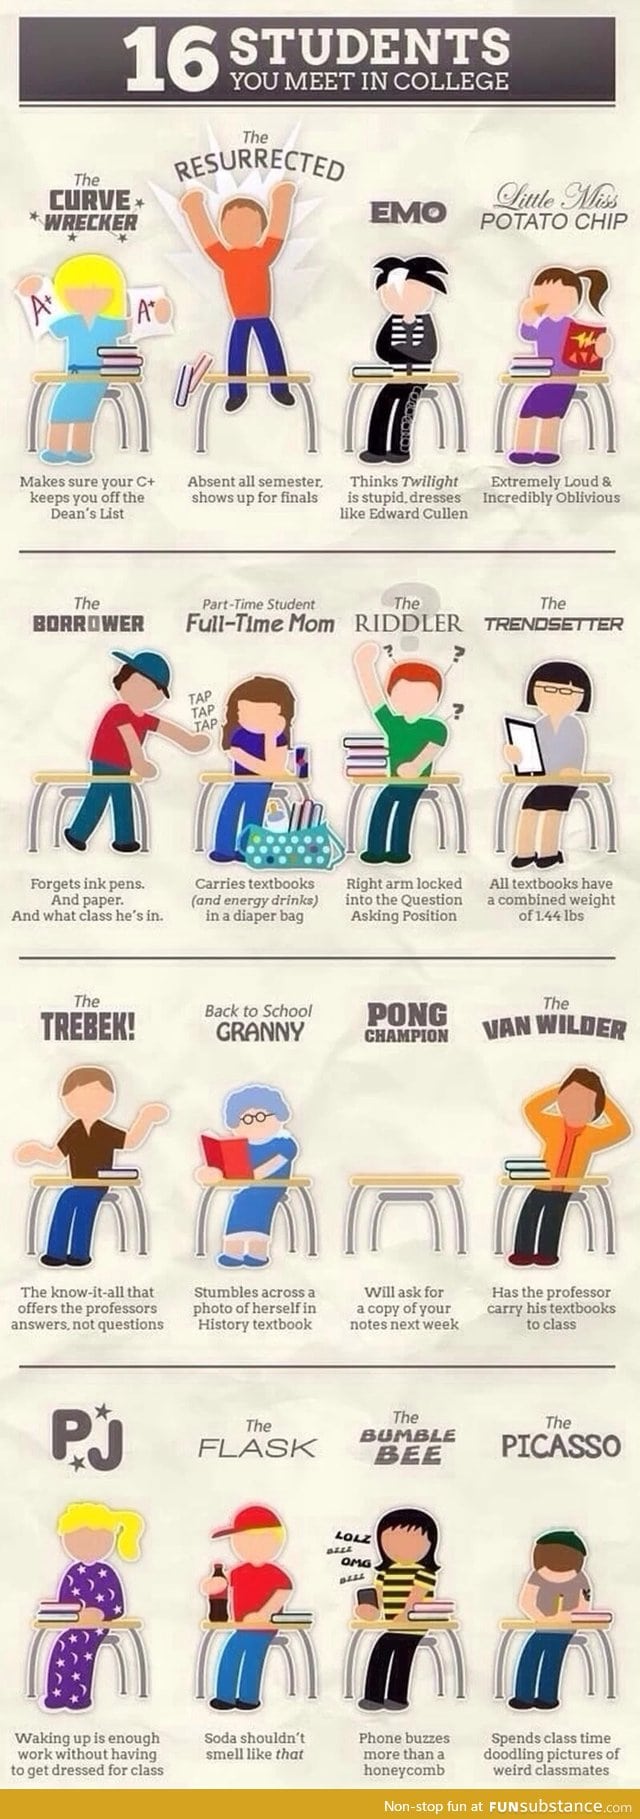 Six types of student